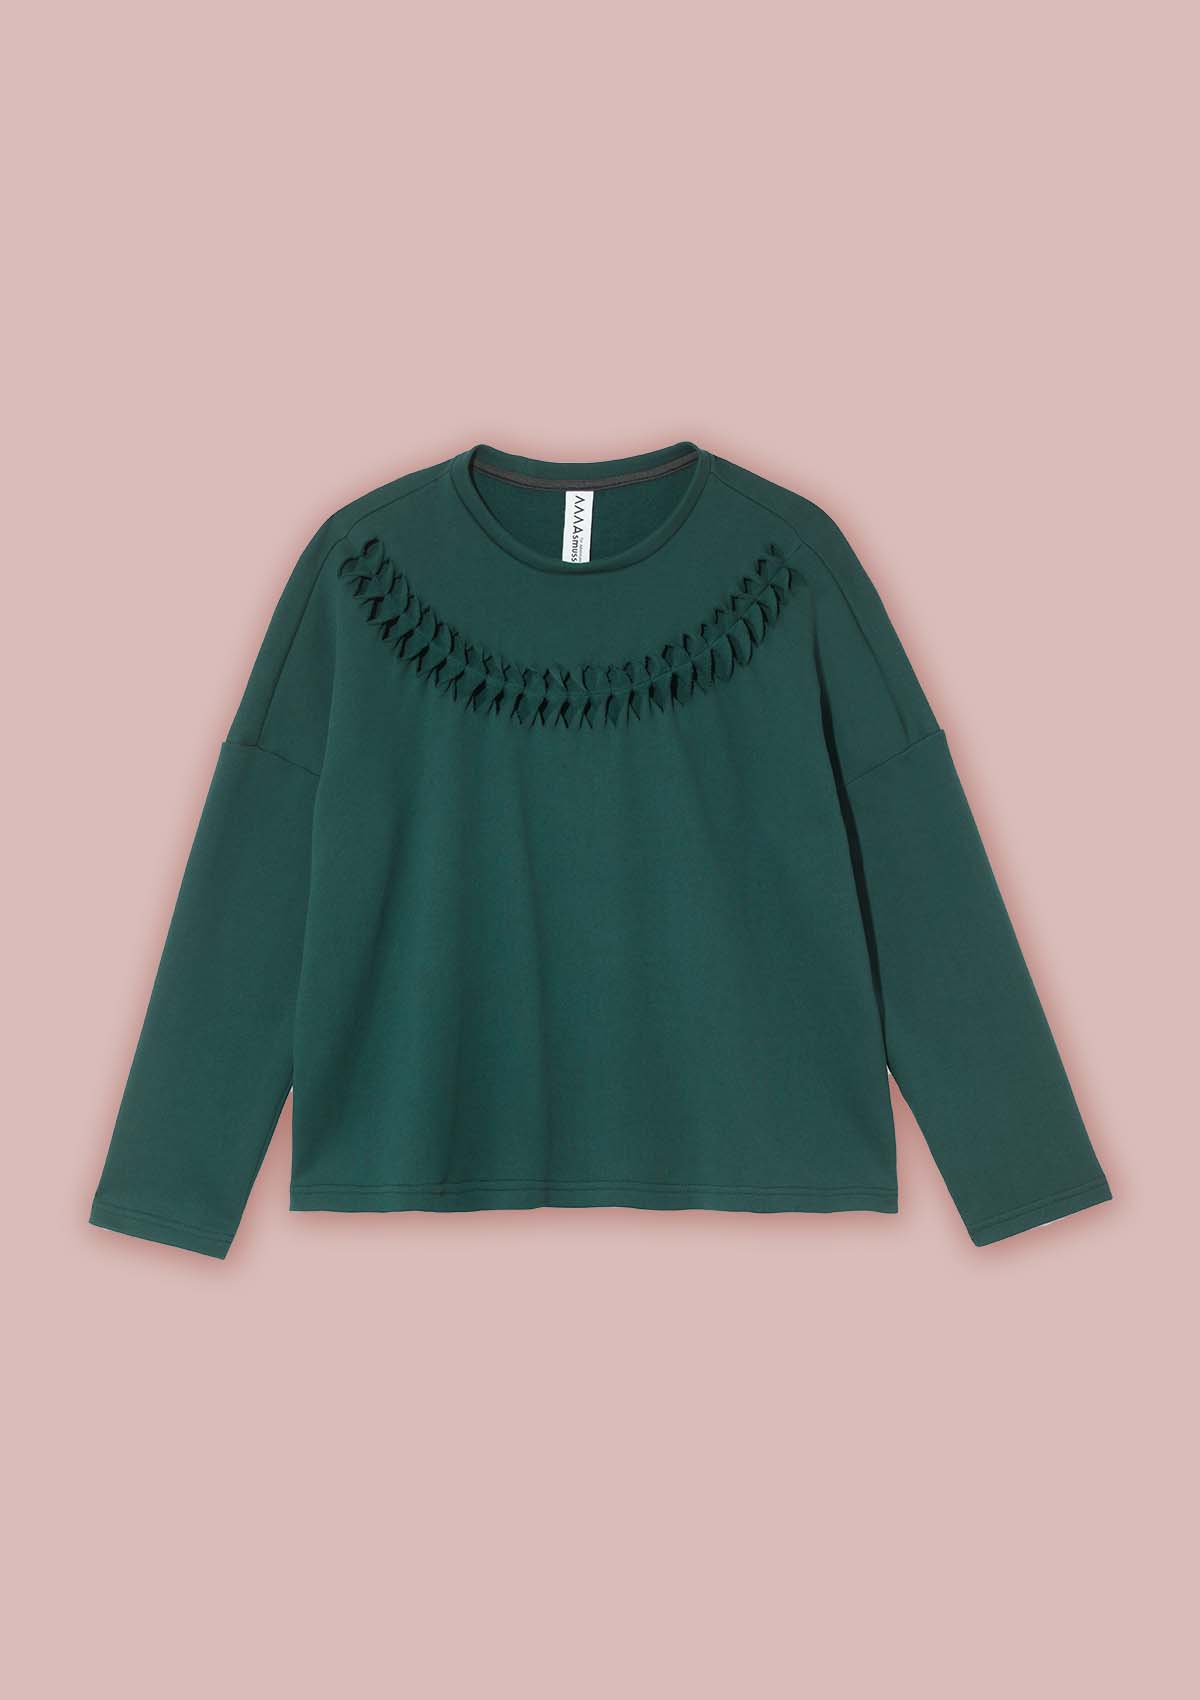 Flat front view of the Anni Sweatshirt with crew neck and long sleeves in Trekking Green with the twist and stitch detail